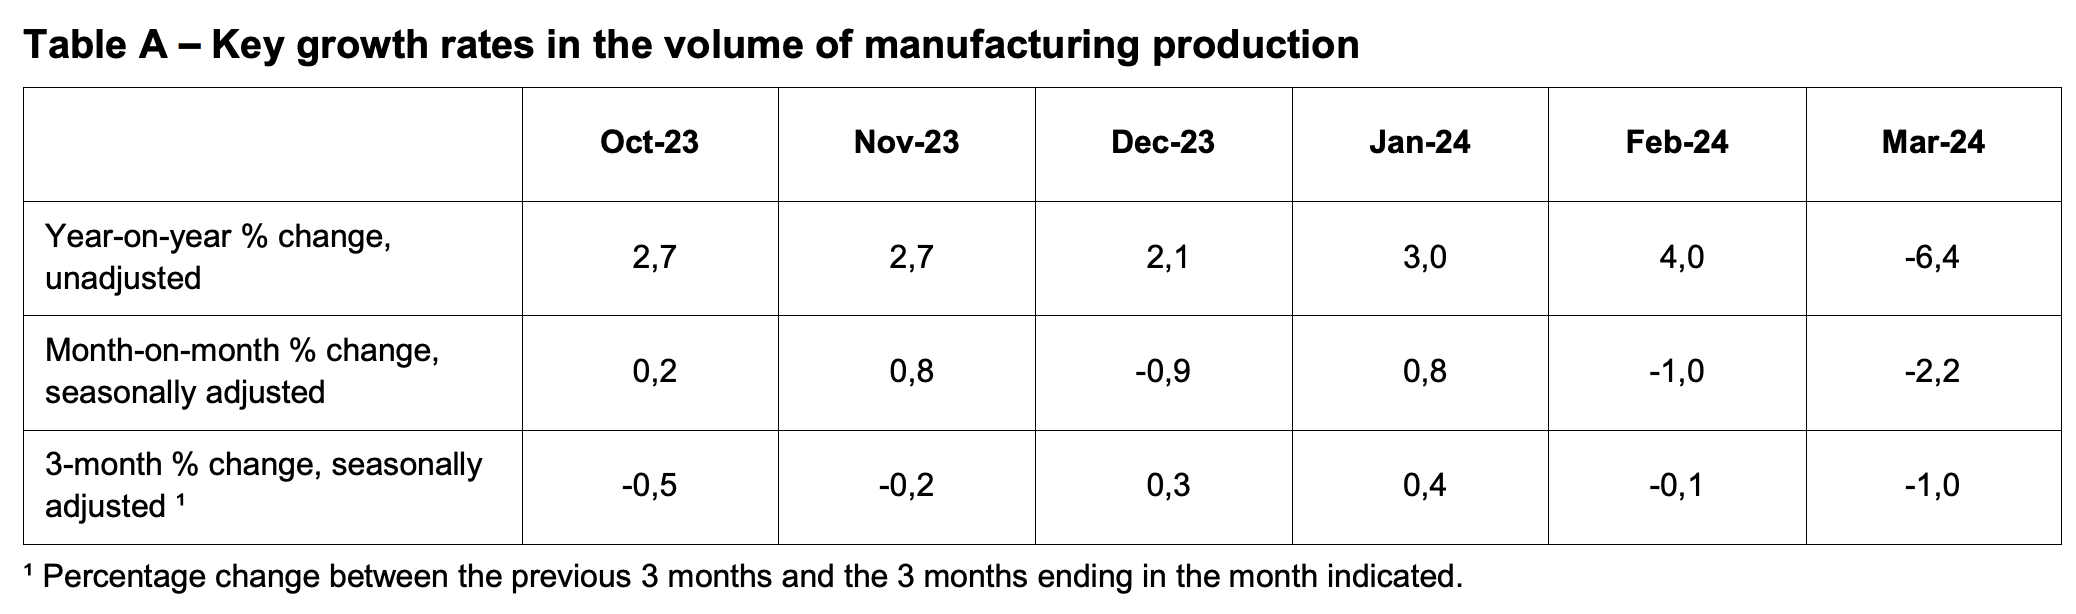 meltdown — sa manufacturing output tanks 6.4% year on year in march, raising risk of q1 gdp contraction